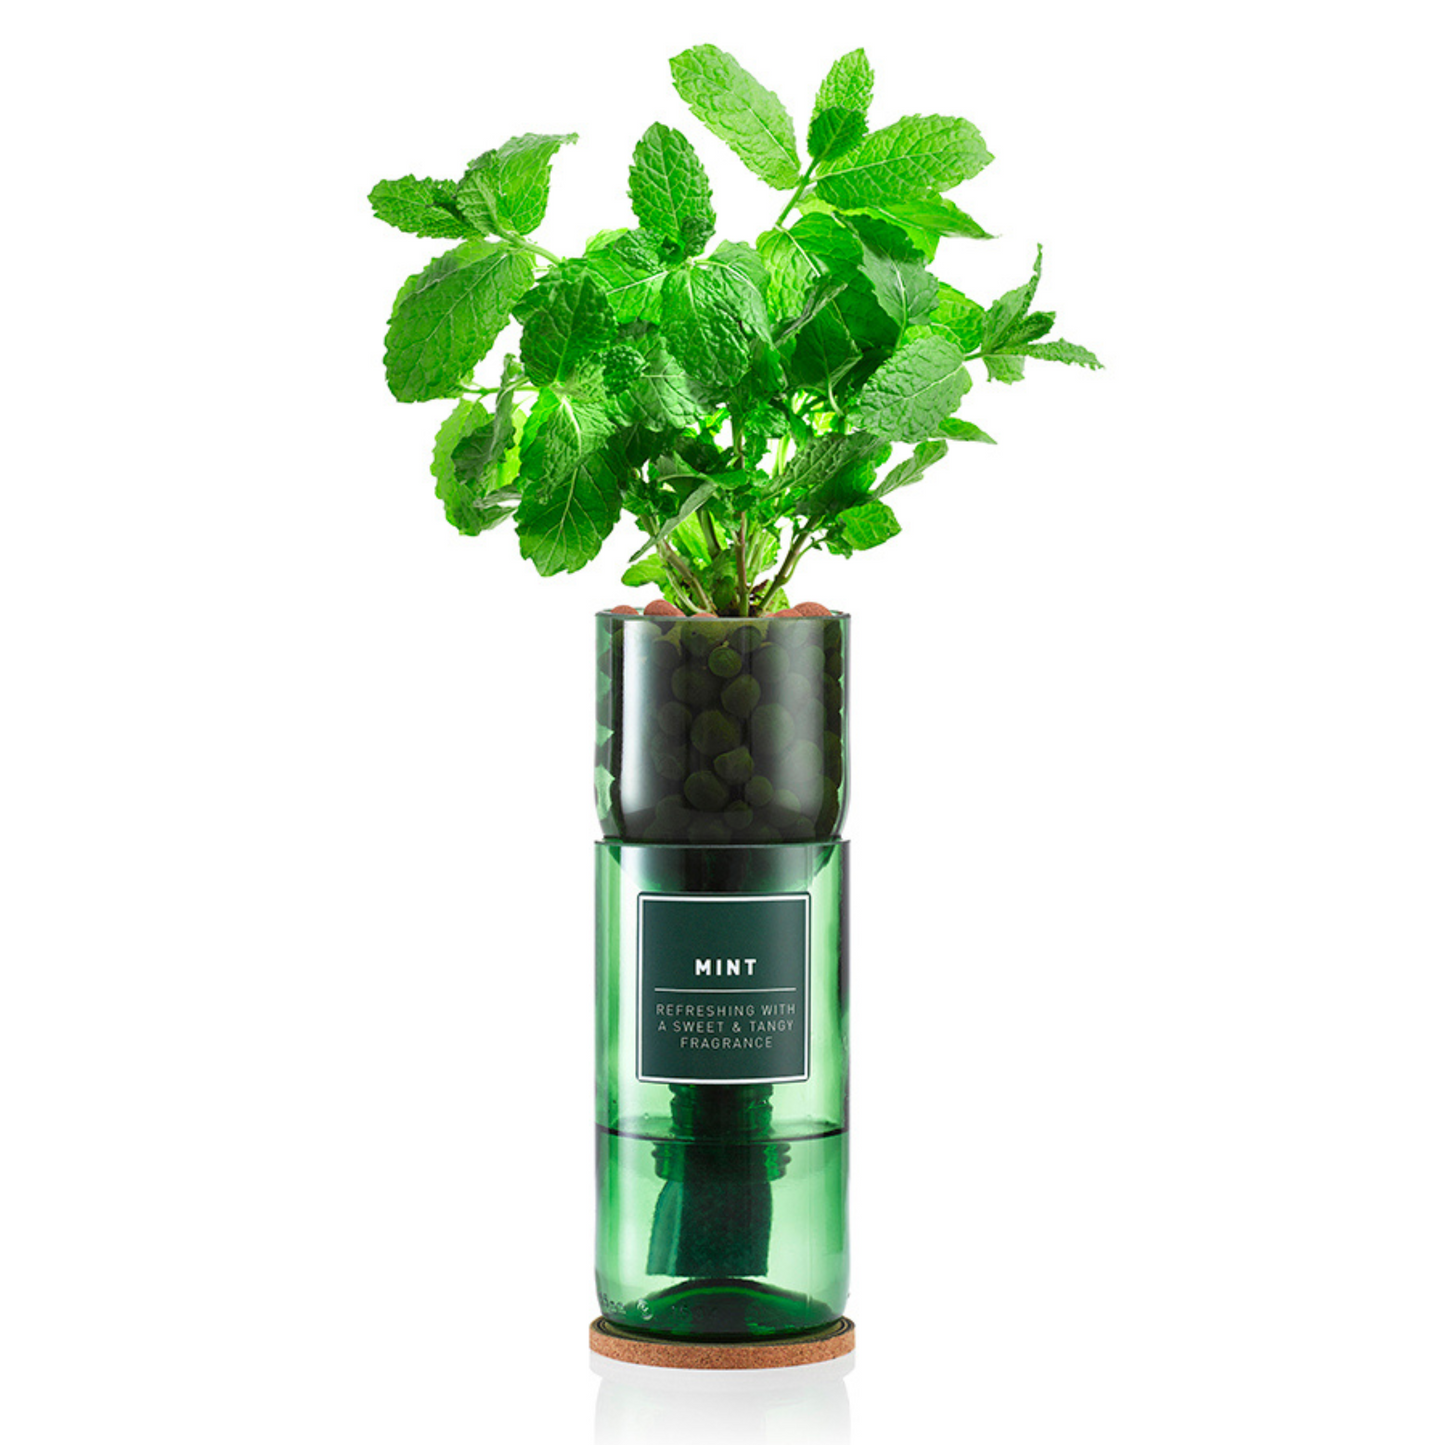 Mint growing out of a glass vase